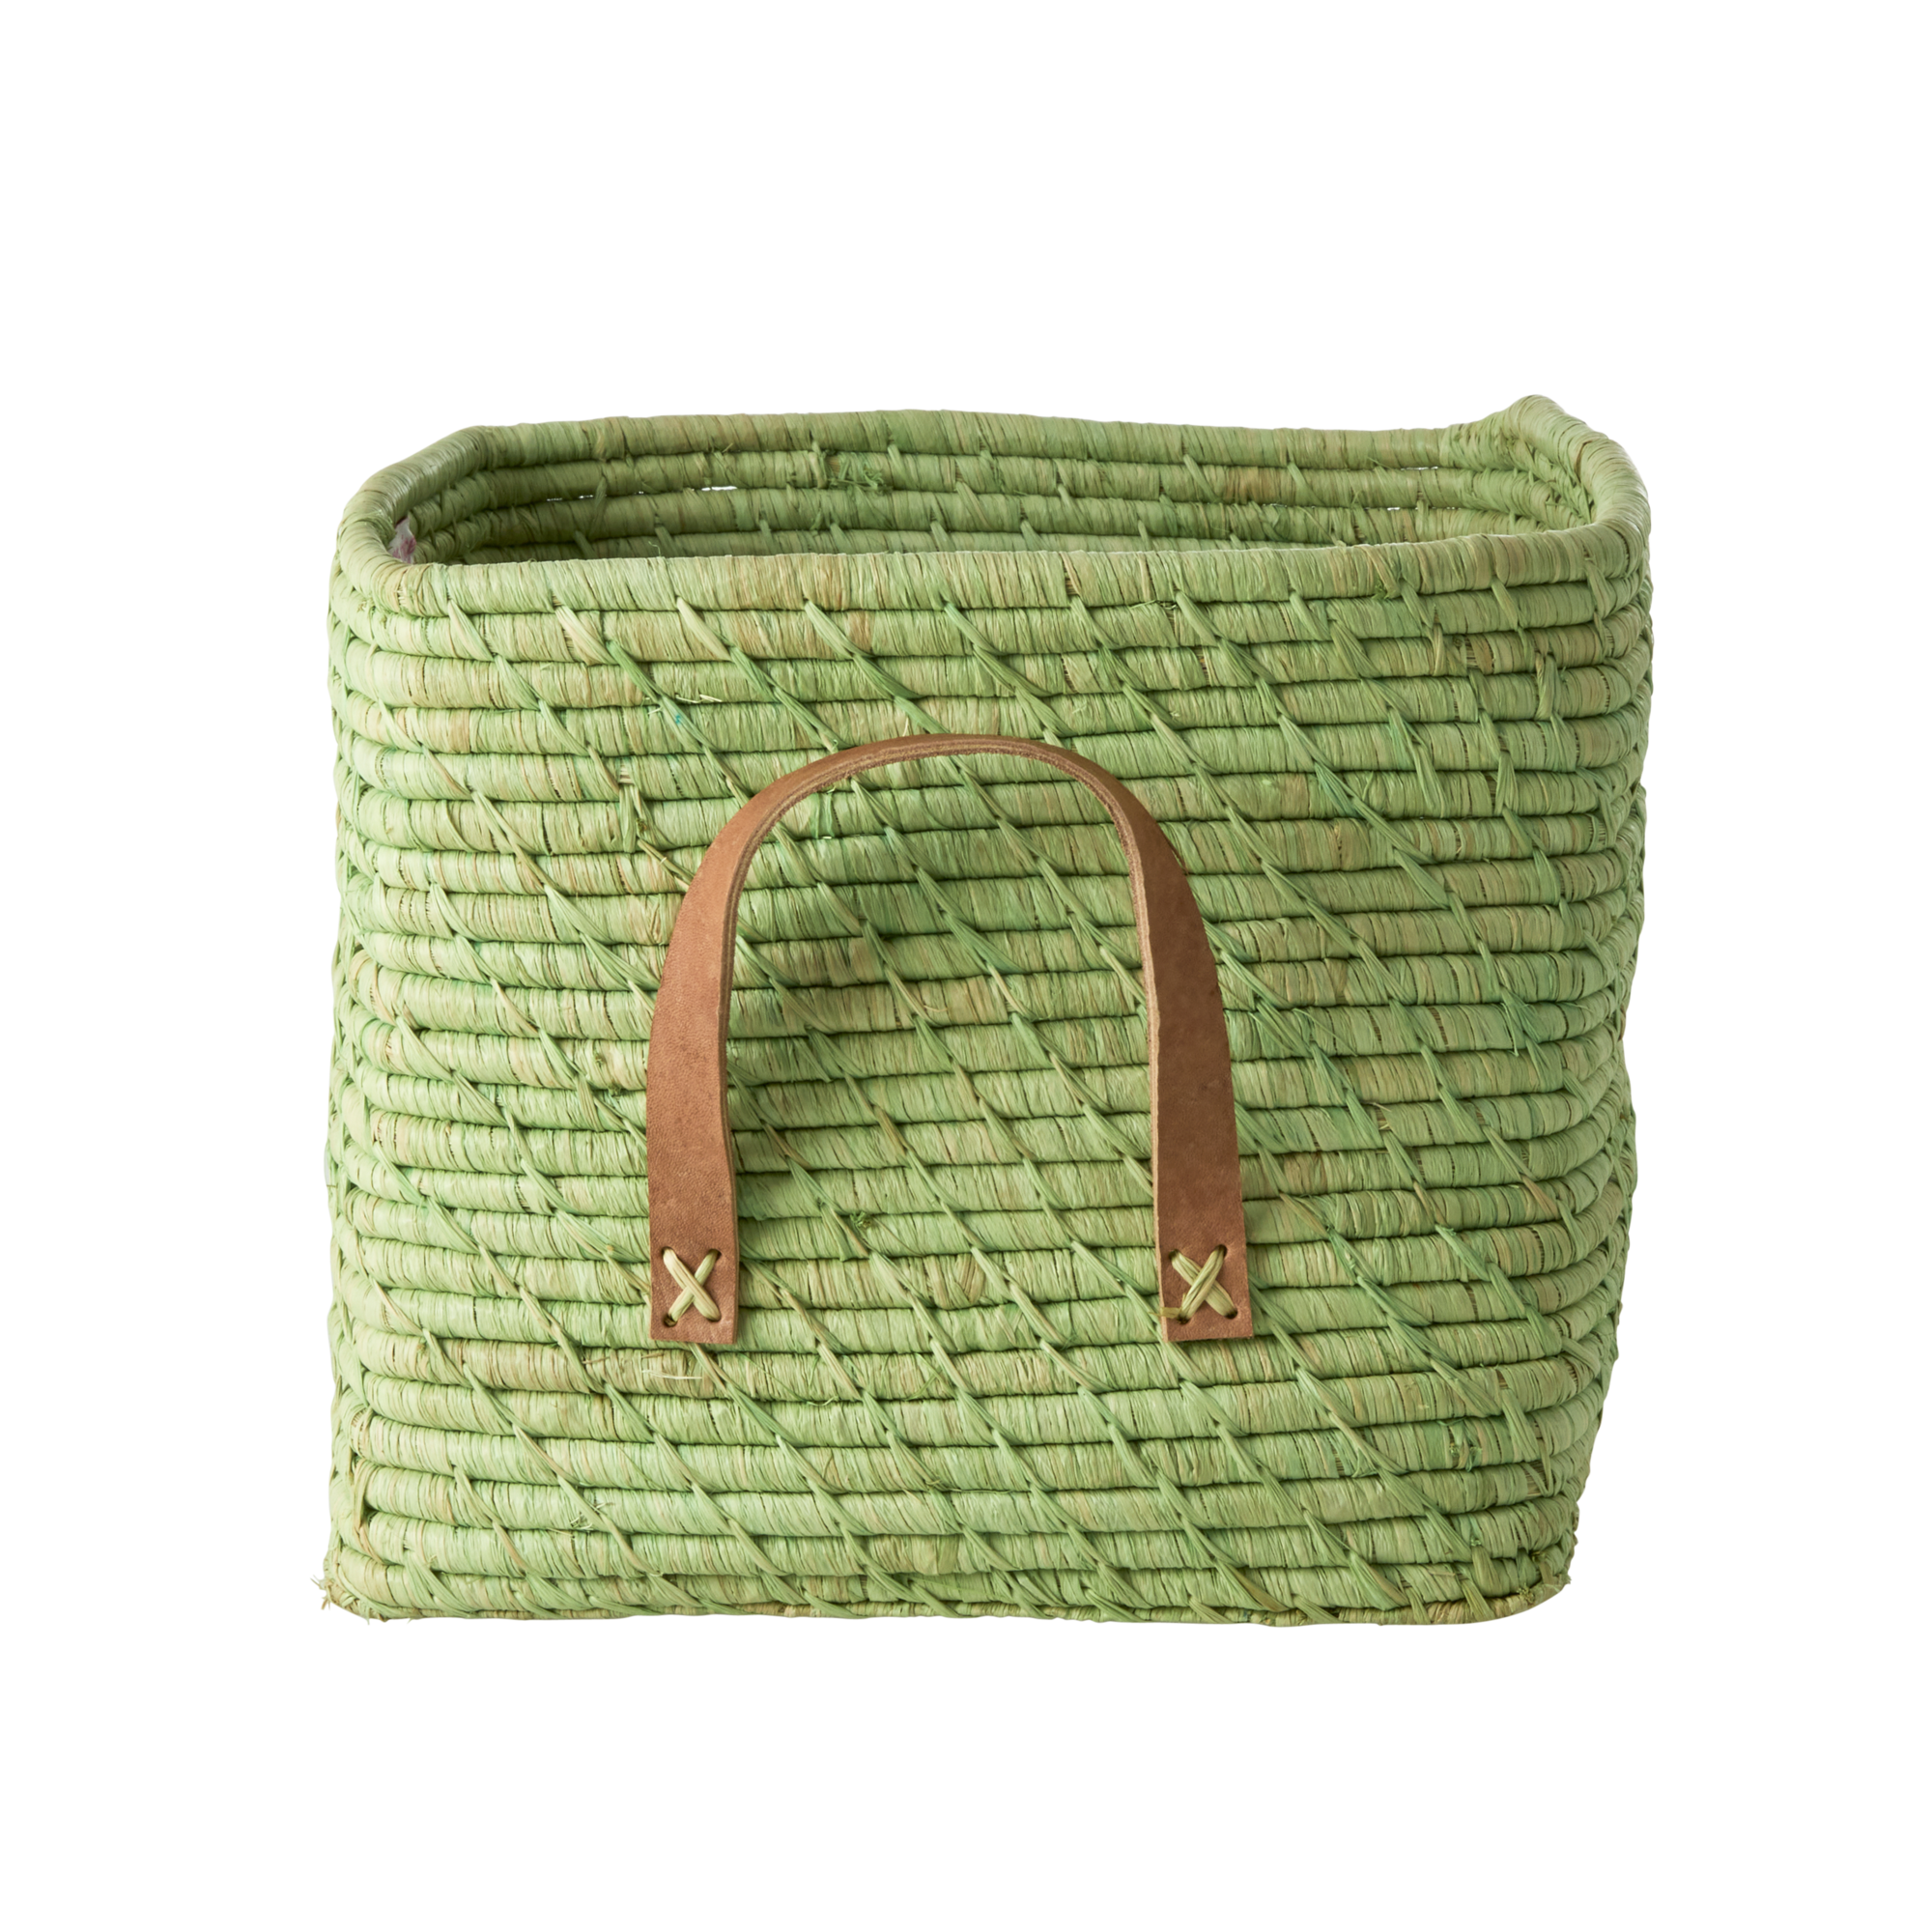 Rice - Small Square Raffia Basket with Leather Handles - Soft Green